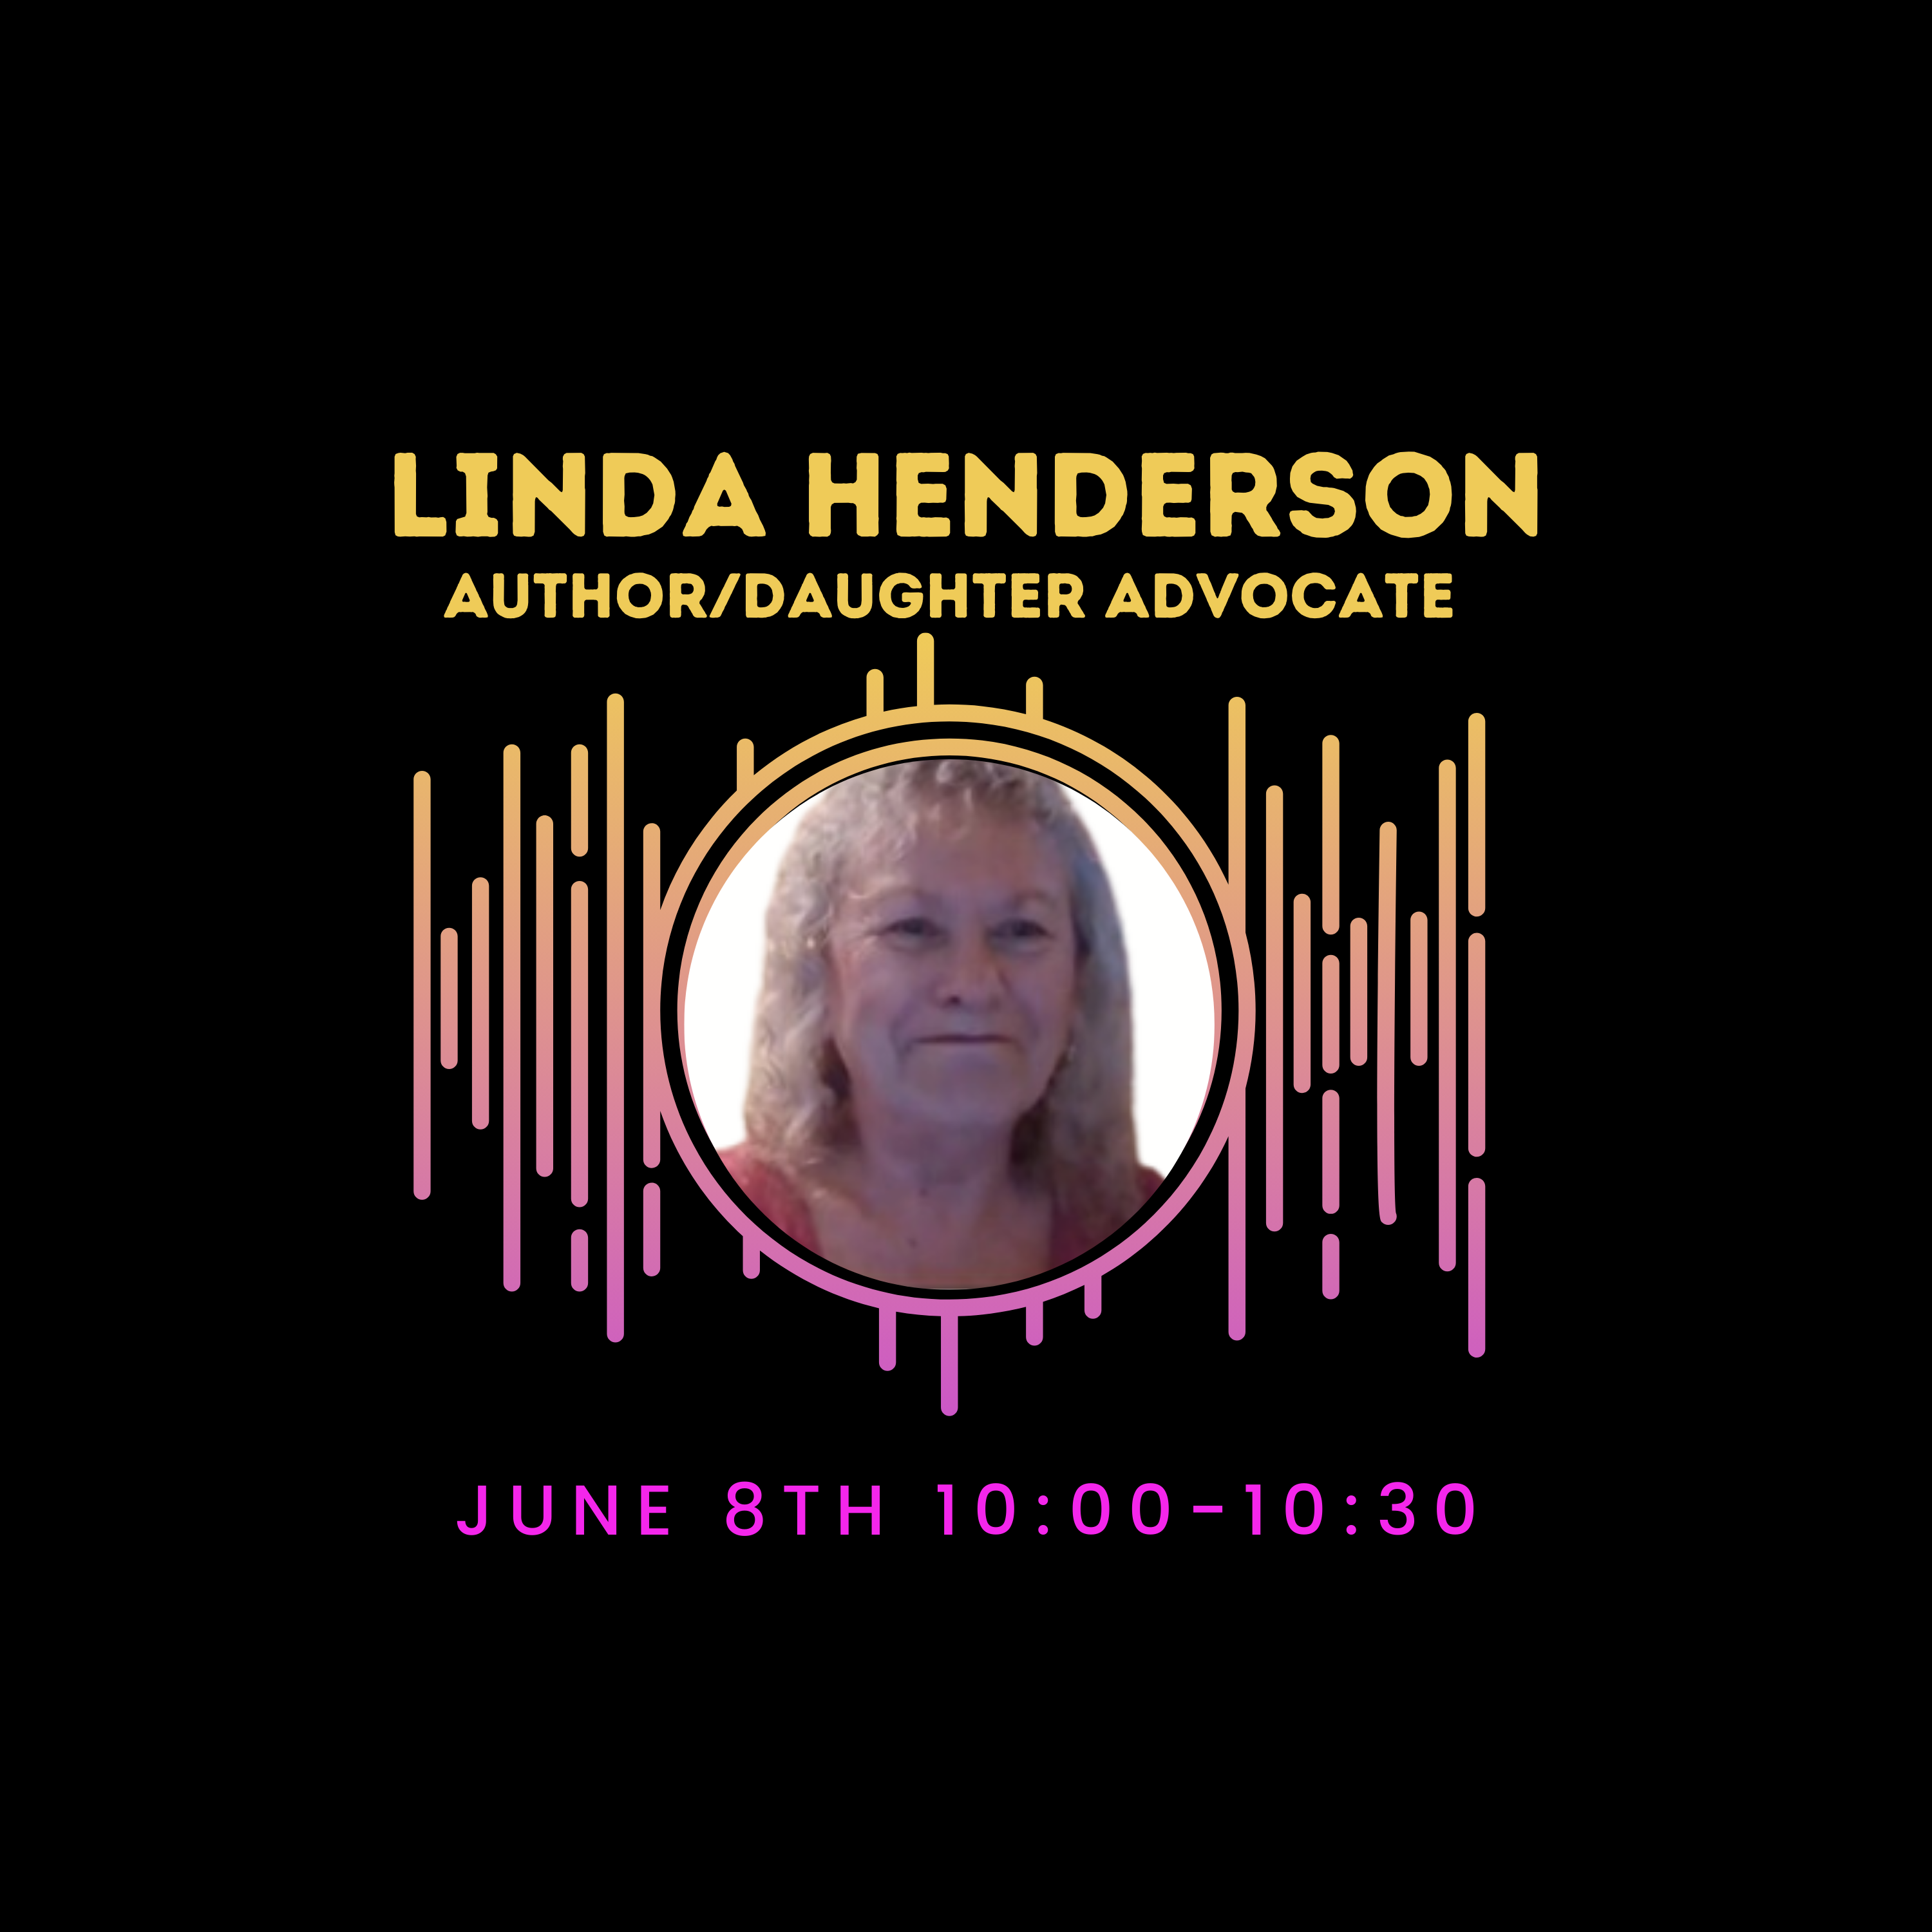 Promotional graphic for the Reflect Live Podcast featuring a portrait of Linda Henderson, labeled as 'AUTHOR/DAUGHTER ADVOCATE', encircled by a pink and orange waveform graphic. The text above her photo reads 'LINDA HENDERSON' in bold yellow letters. Below her image, the date and time of the podcast, 'MAY 29TH 10:00–10:30AM', are listed, set against a black background. This image is used to promote an upcoming interview segment on the podcast.